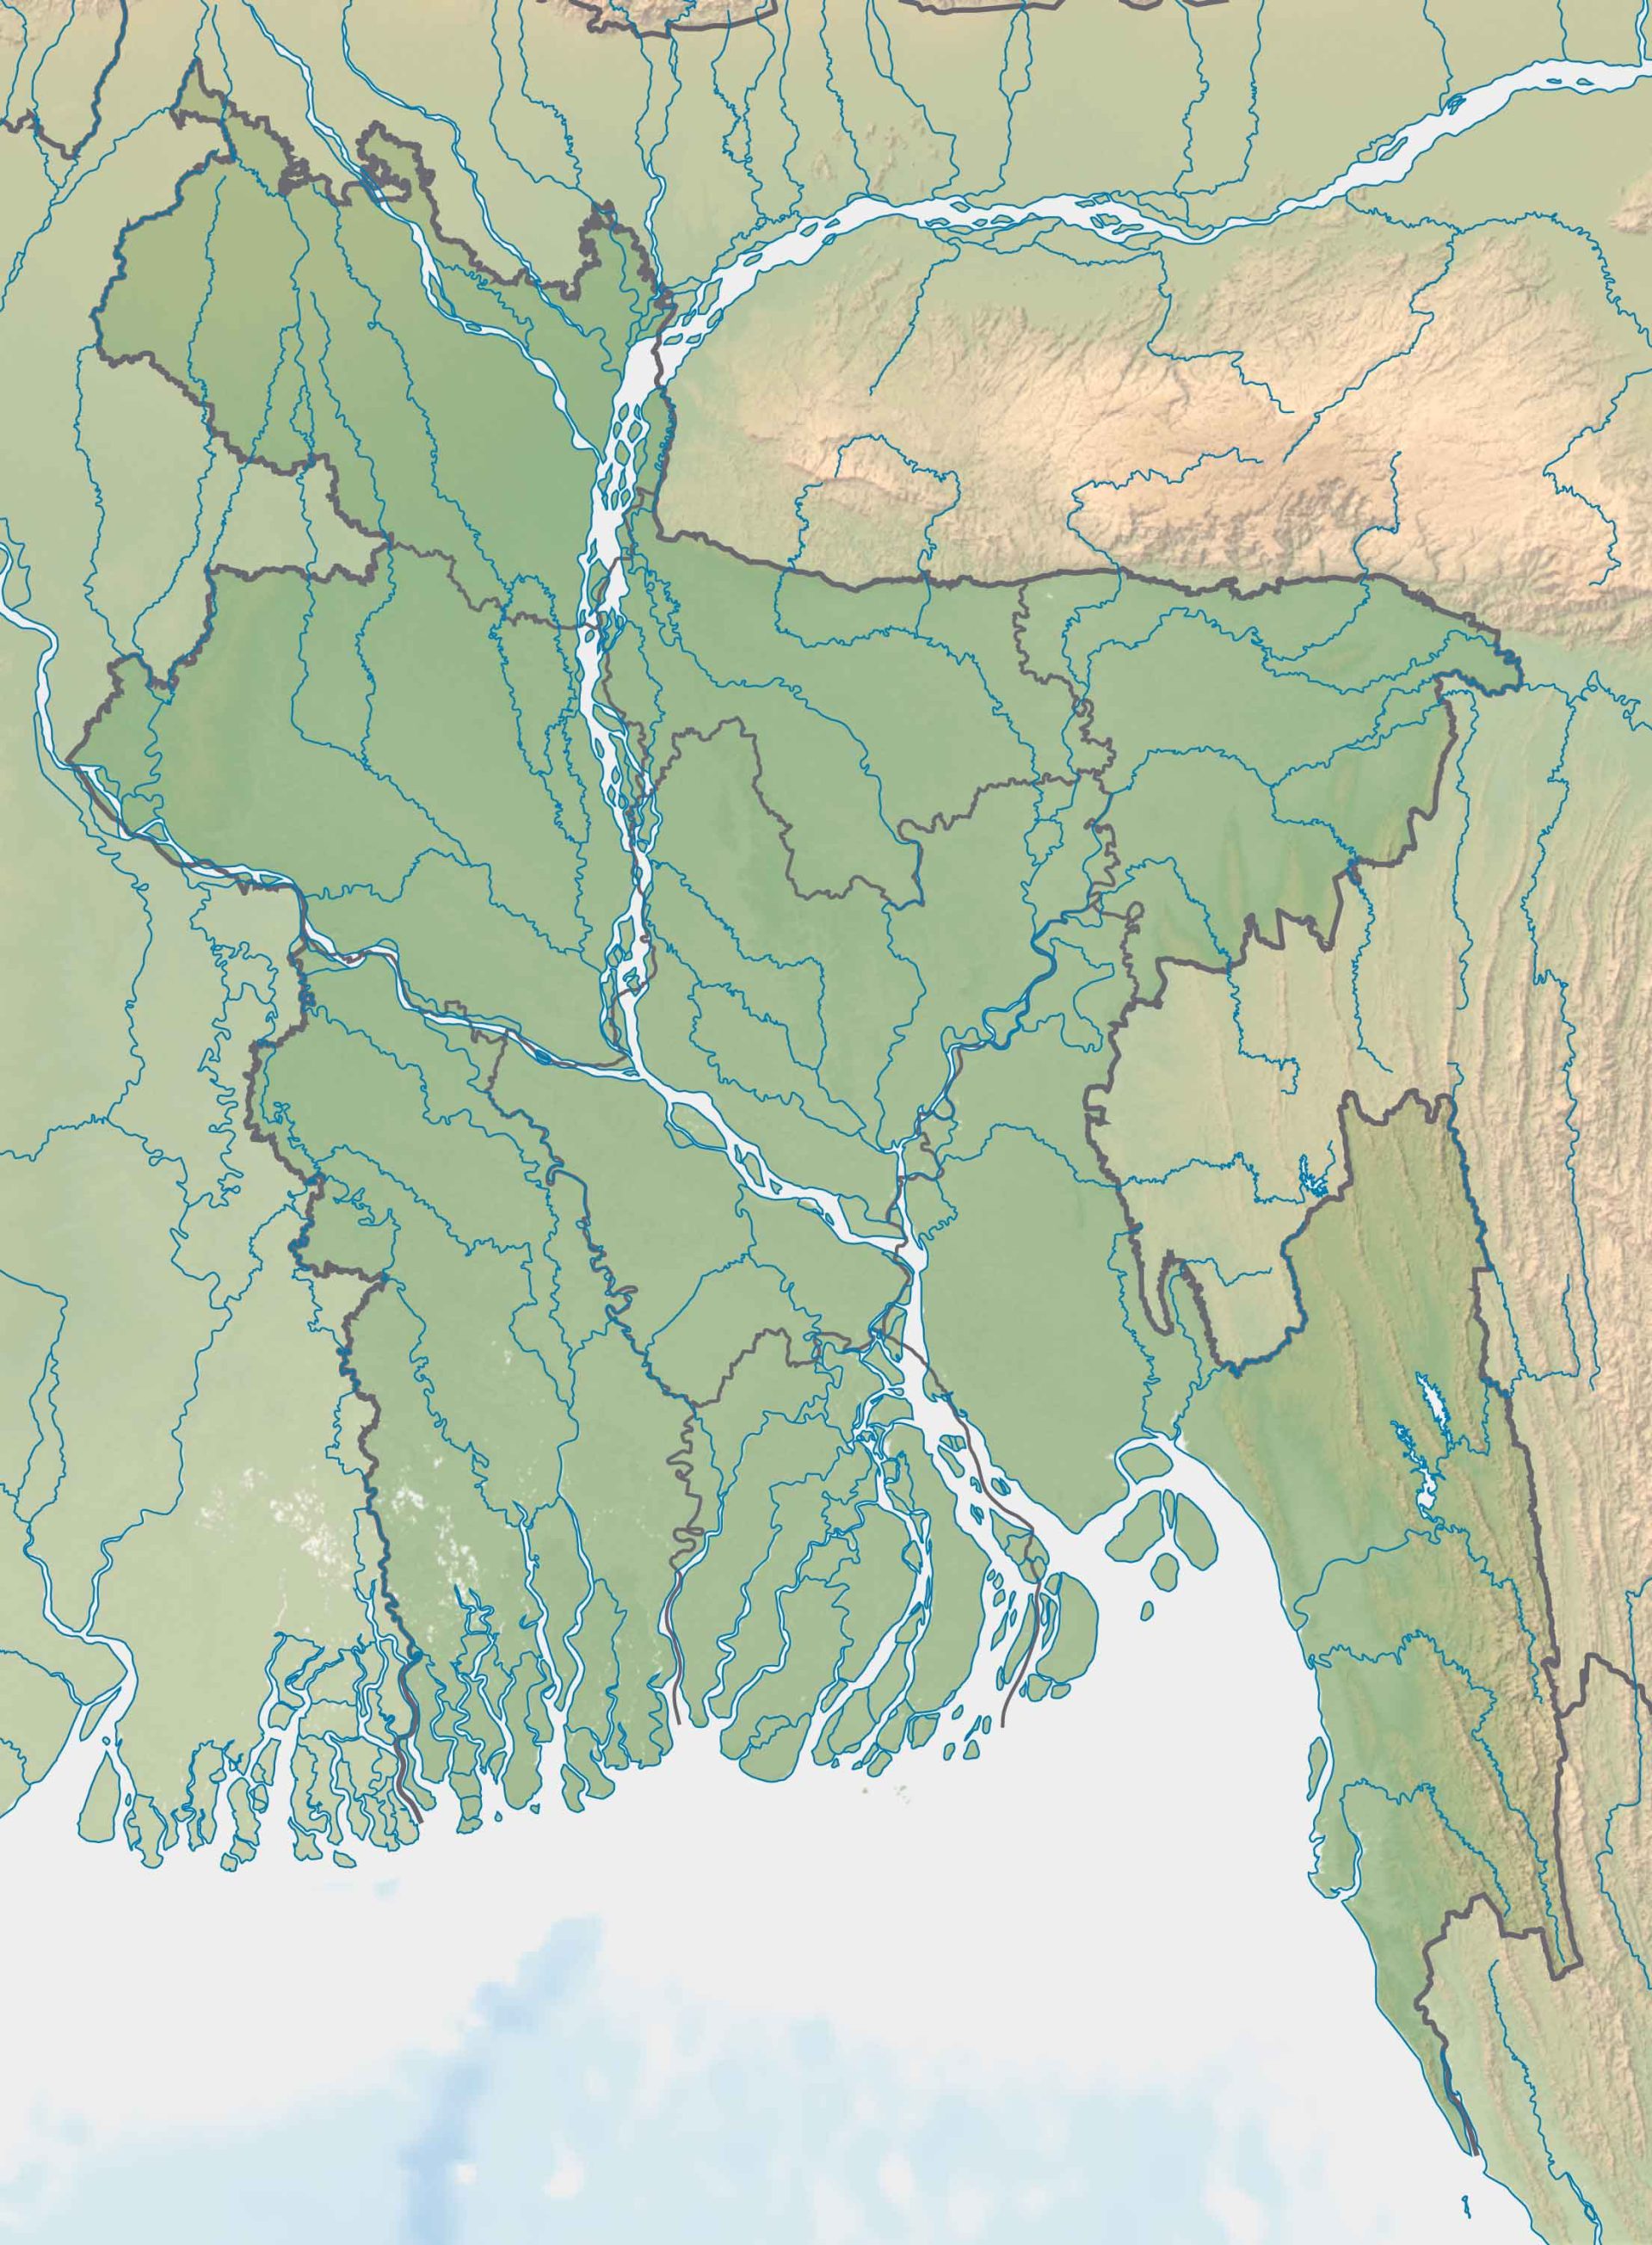 A Collection of Bangladesh Maps - Guide of the World